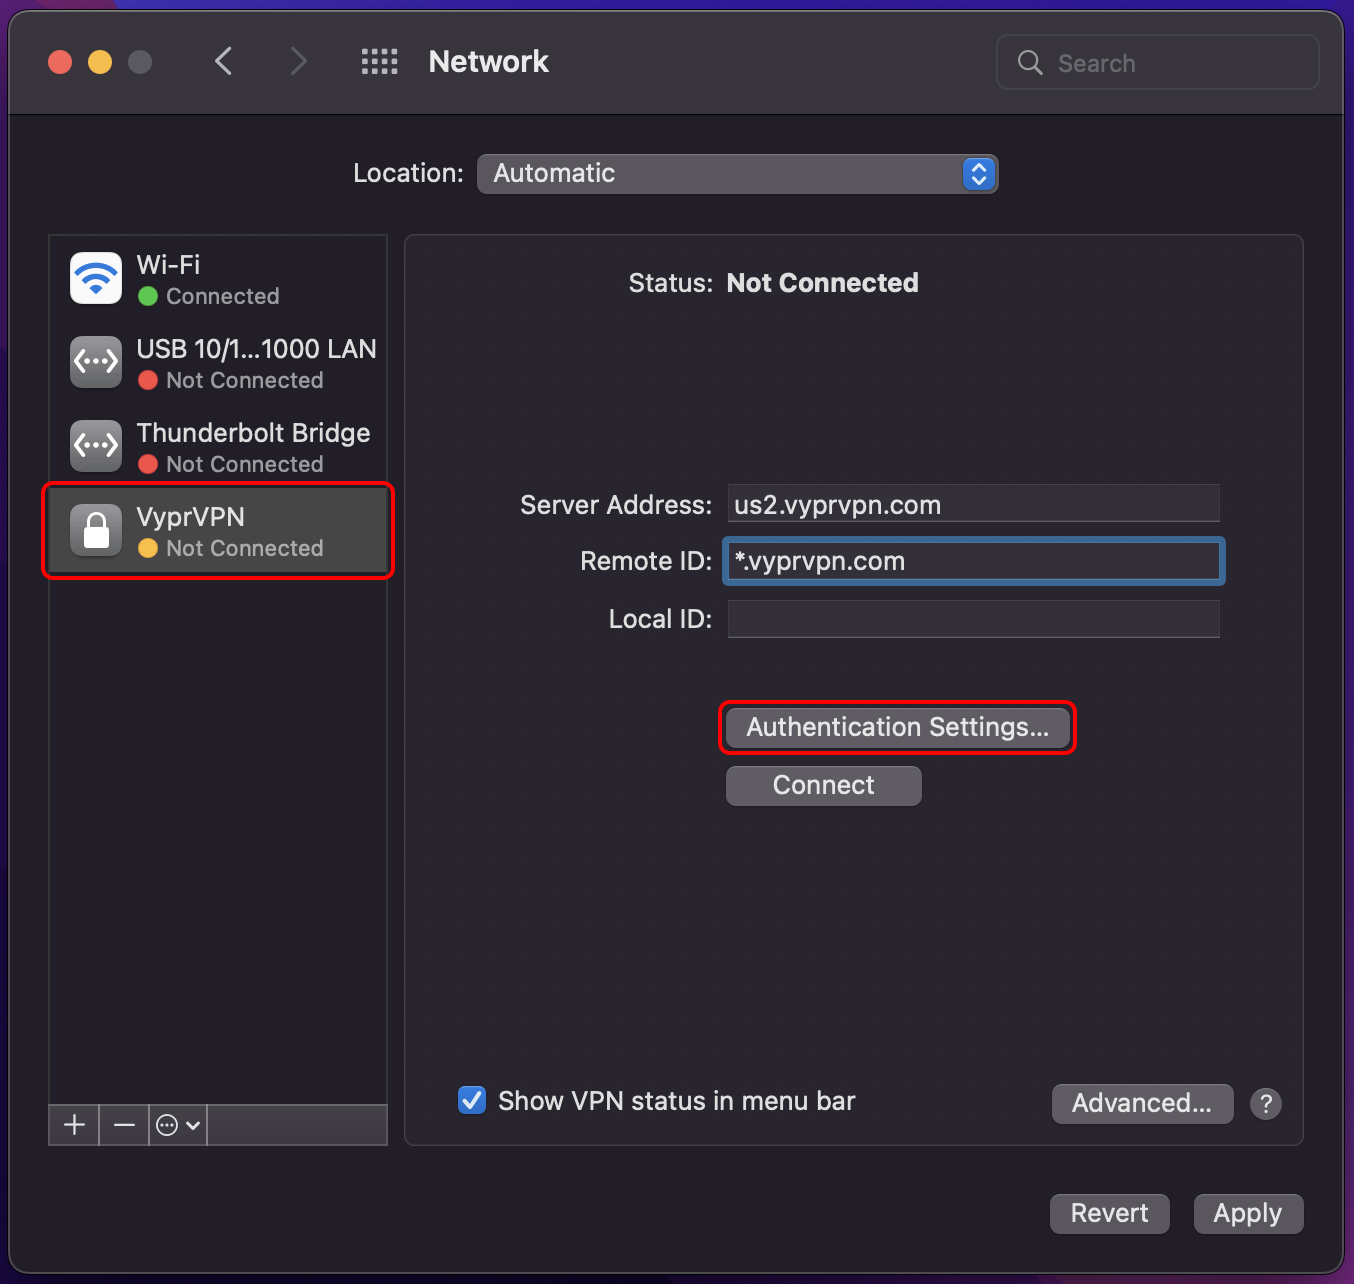 Network - Manual VPN Present - VyprVPN and Auth Settings Highlighted.png